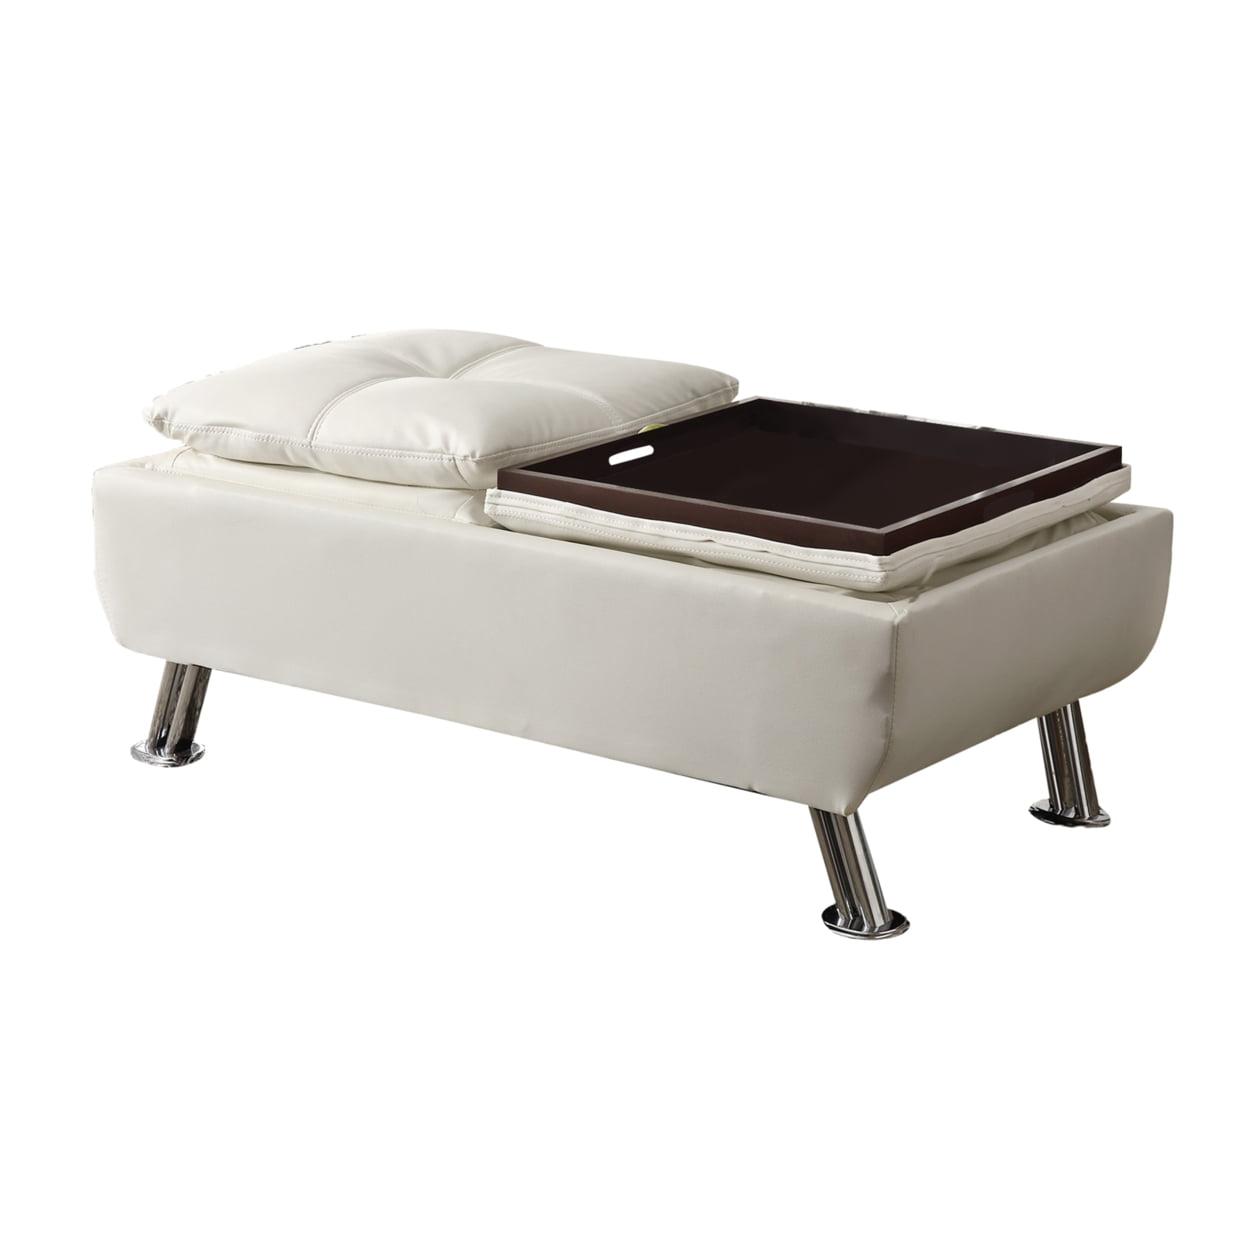 Transitional Tufted White Faux Leather Cocktail Ottoman with Tray